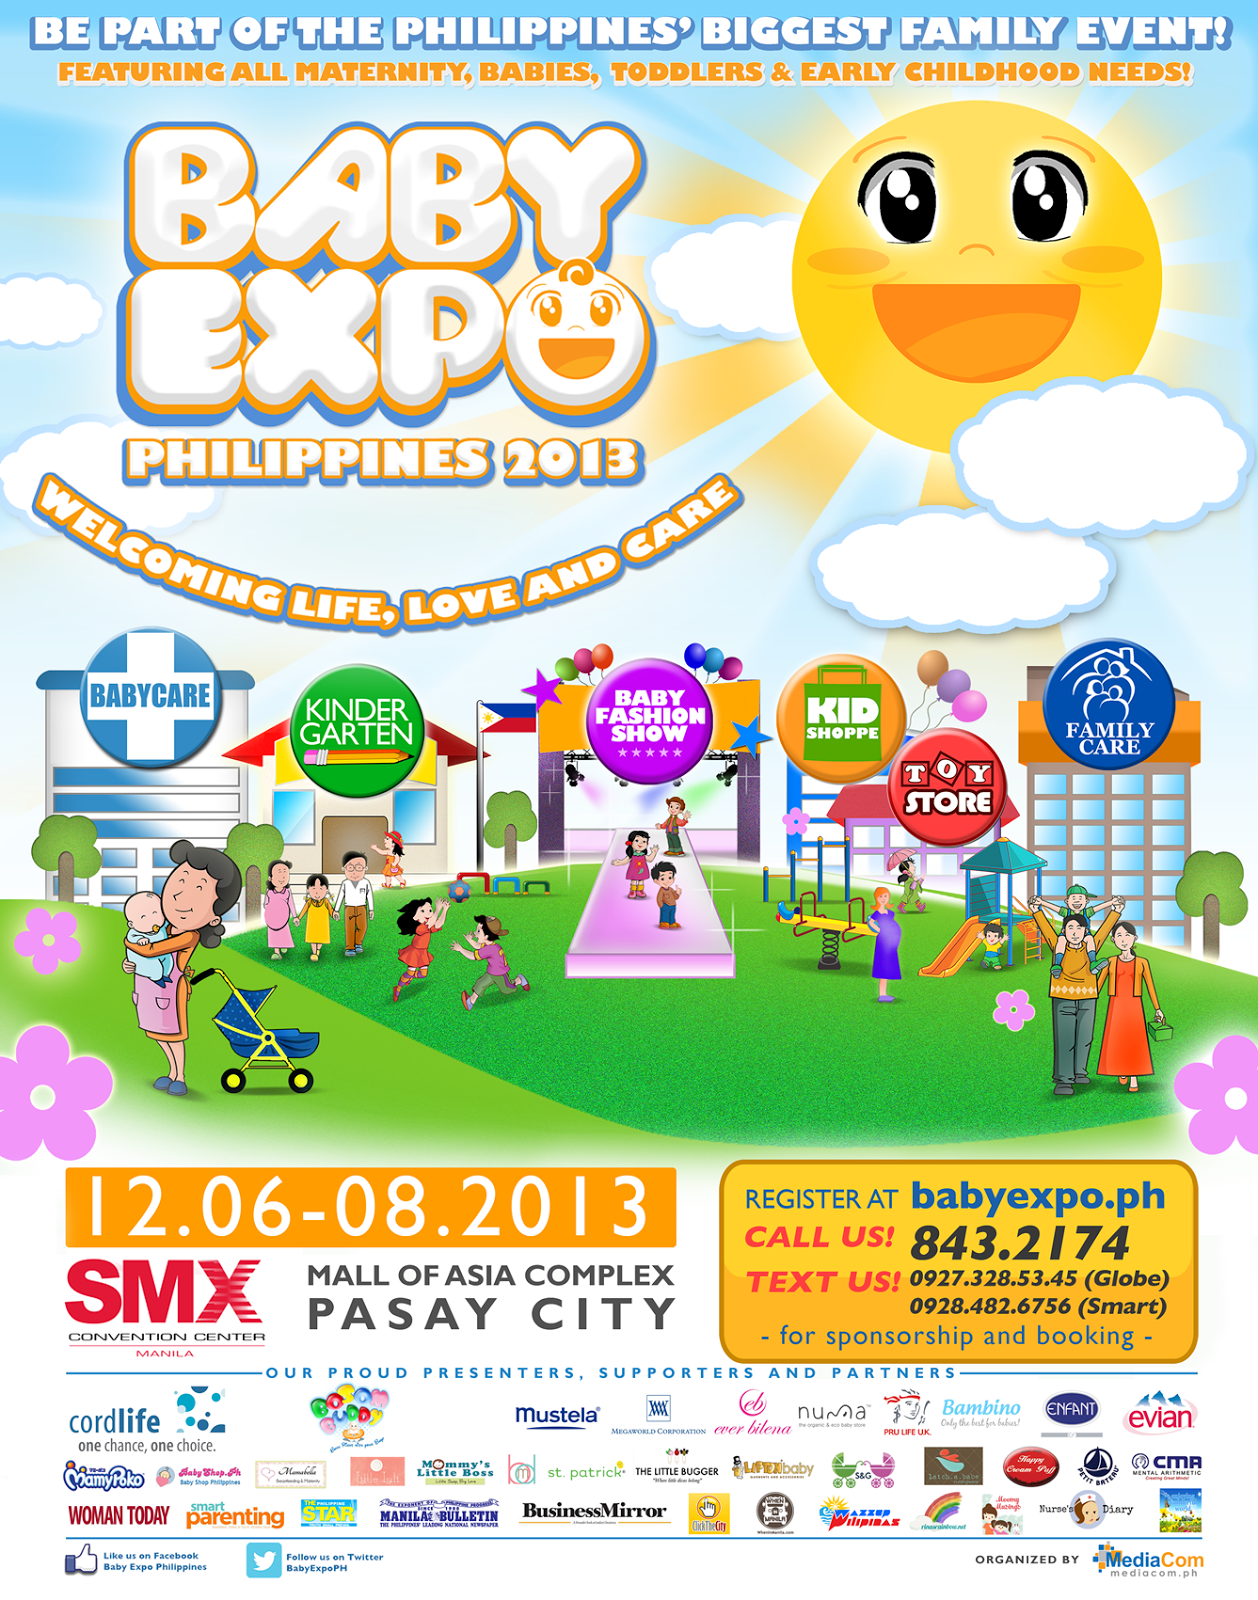 Baby Expo Philippines 2013 Life, Love and Care Wazzup